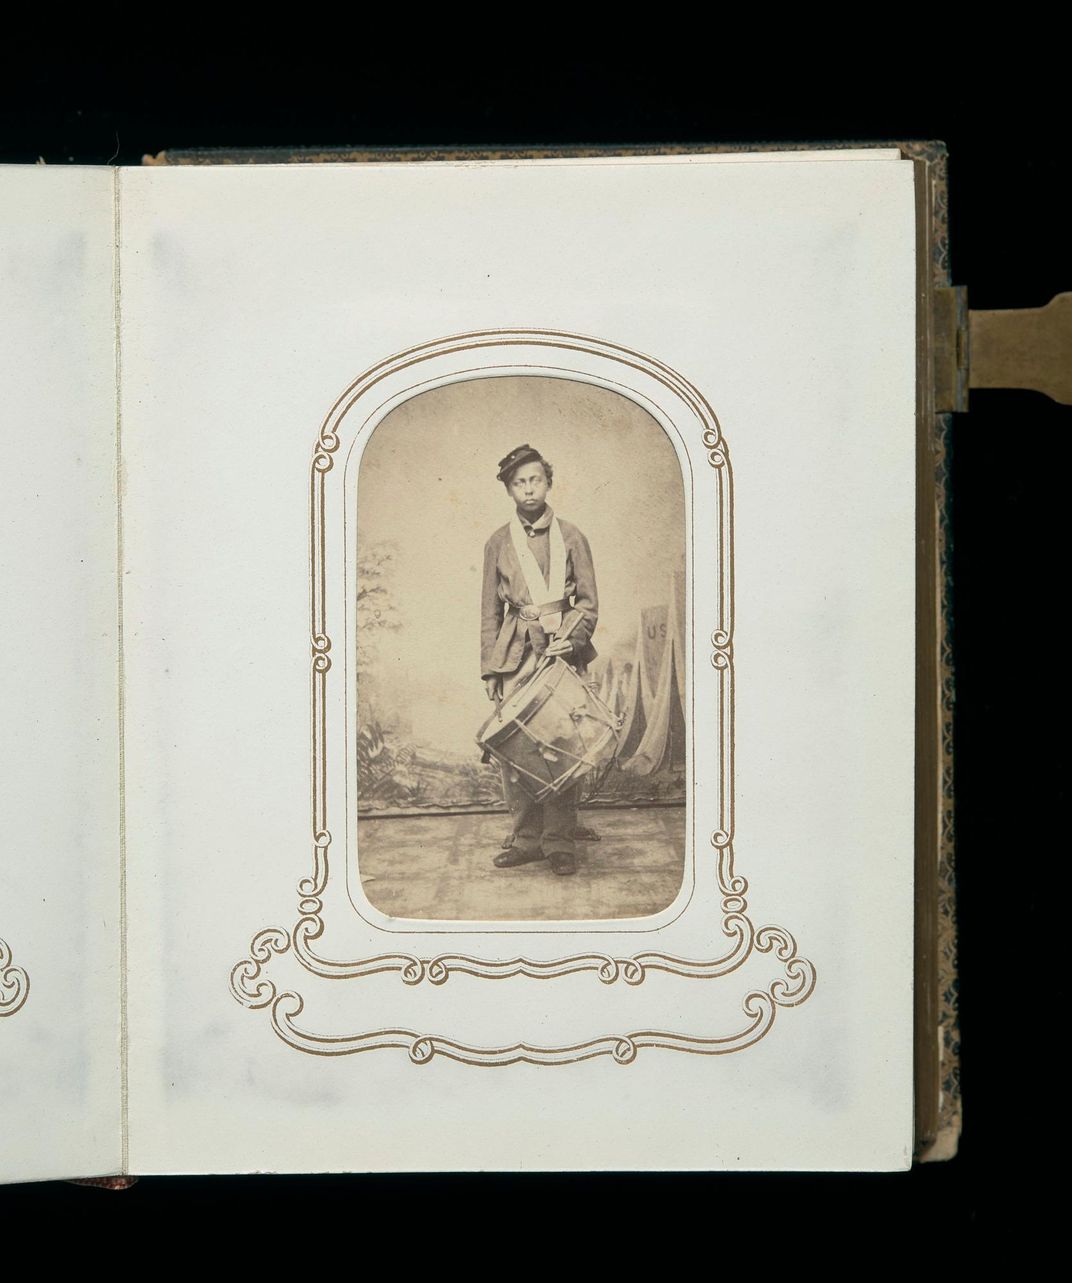 A drummer photographed by John Ritchie and included in a carte-de-visite album of the 54th Massachusetts Infantry Regiment